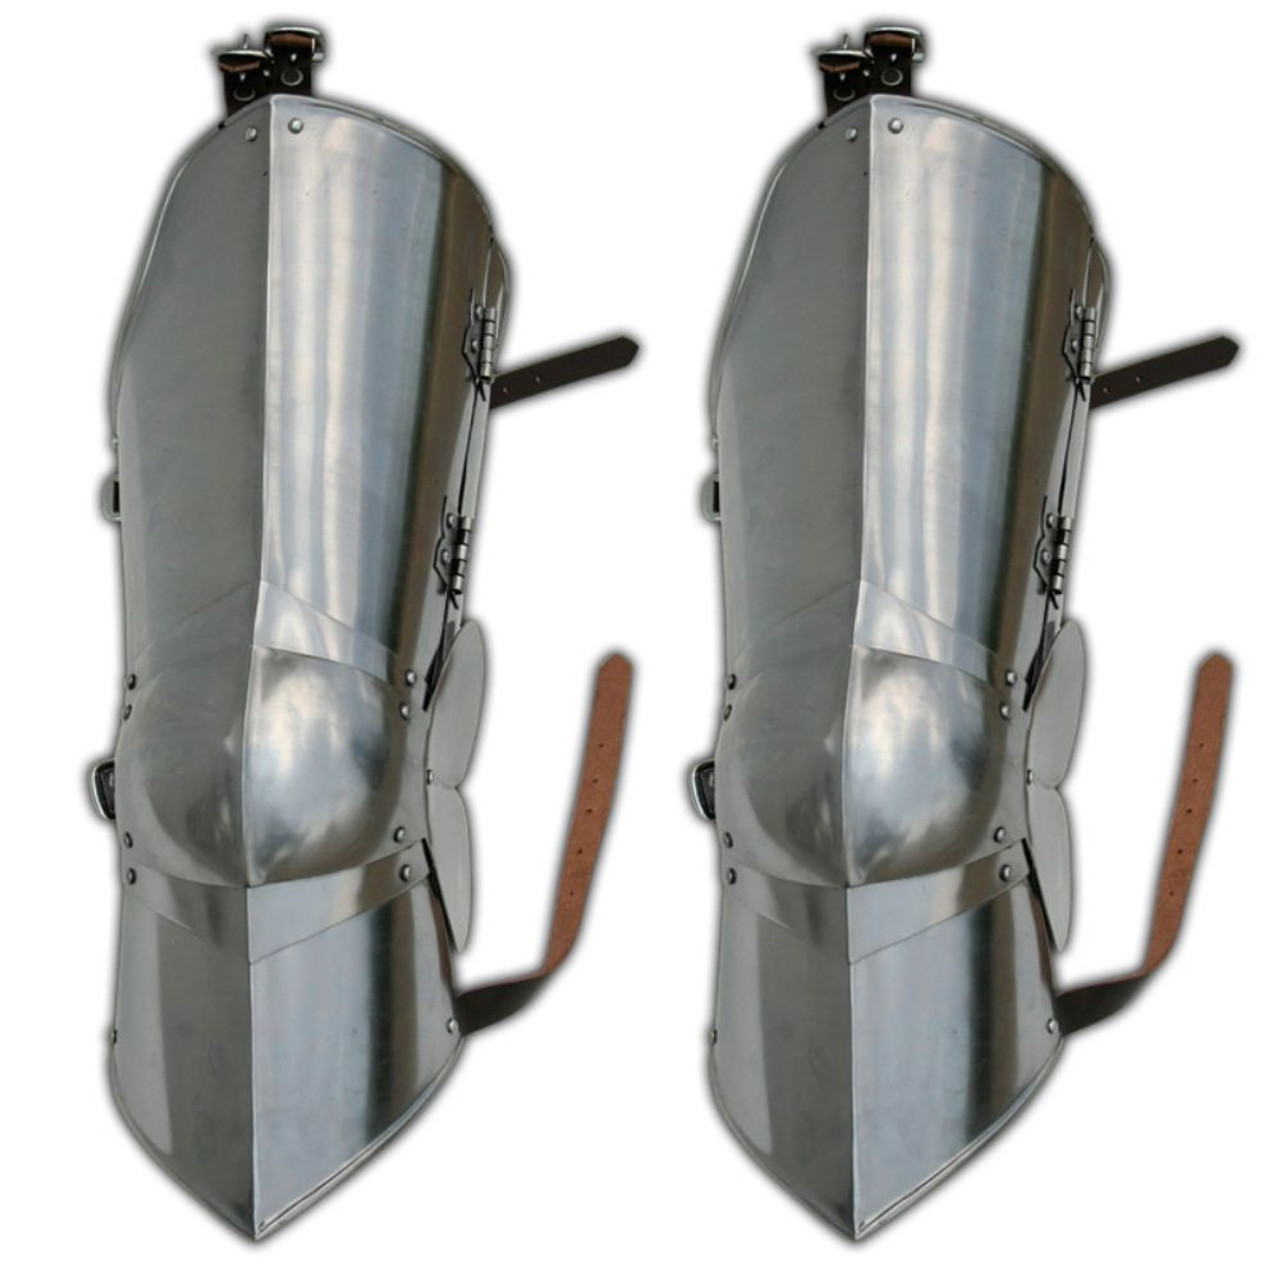 Medieval Plate Armour A to Z List